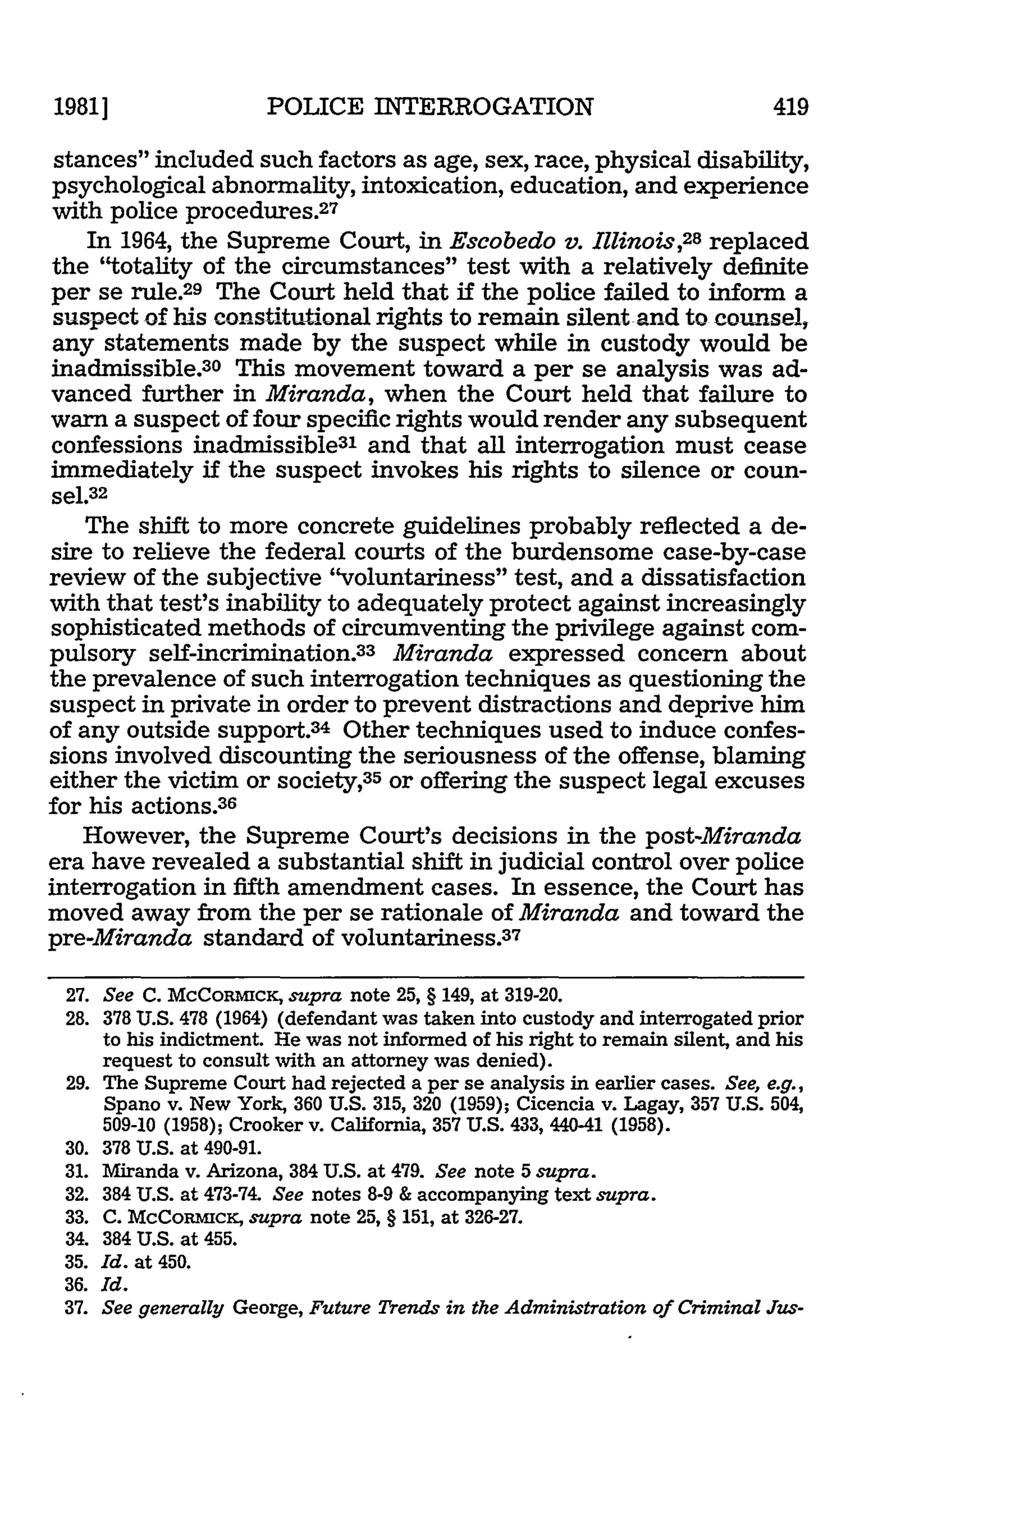 1981] POLICE INTERROGATION stances" included such factors as age, sex, race, physical disability, psychological abnormality, intoxication, education, and experience with police procedures.